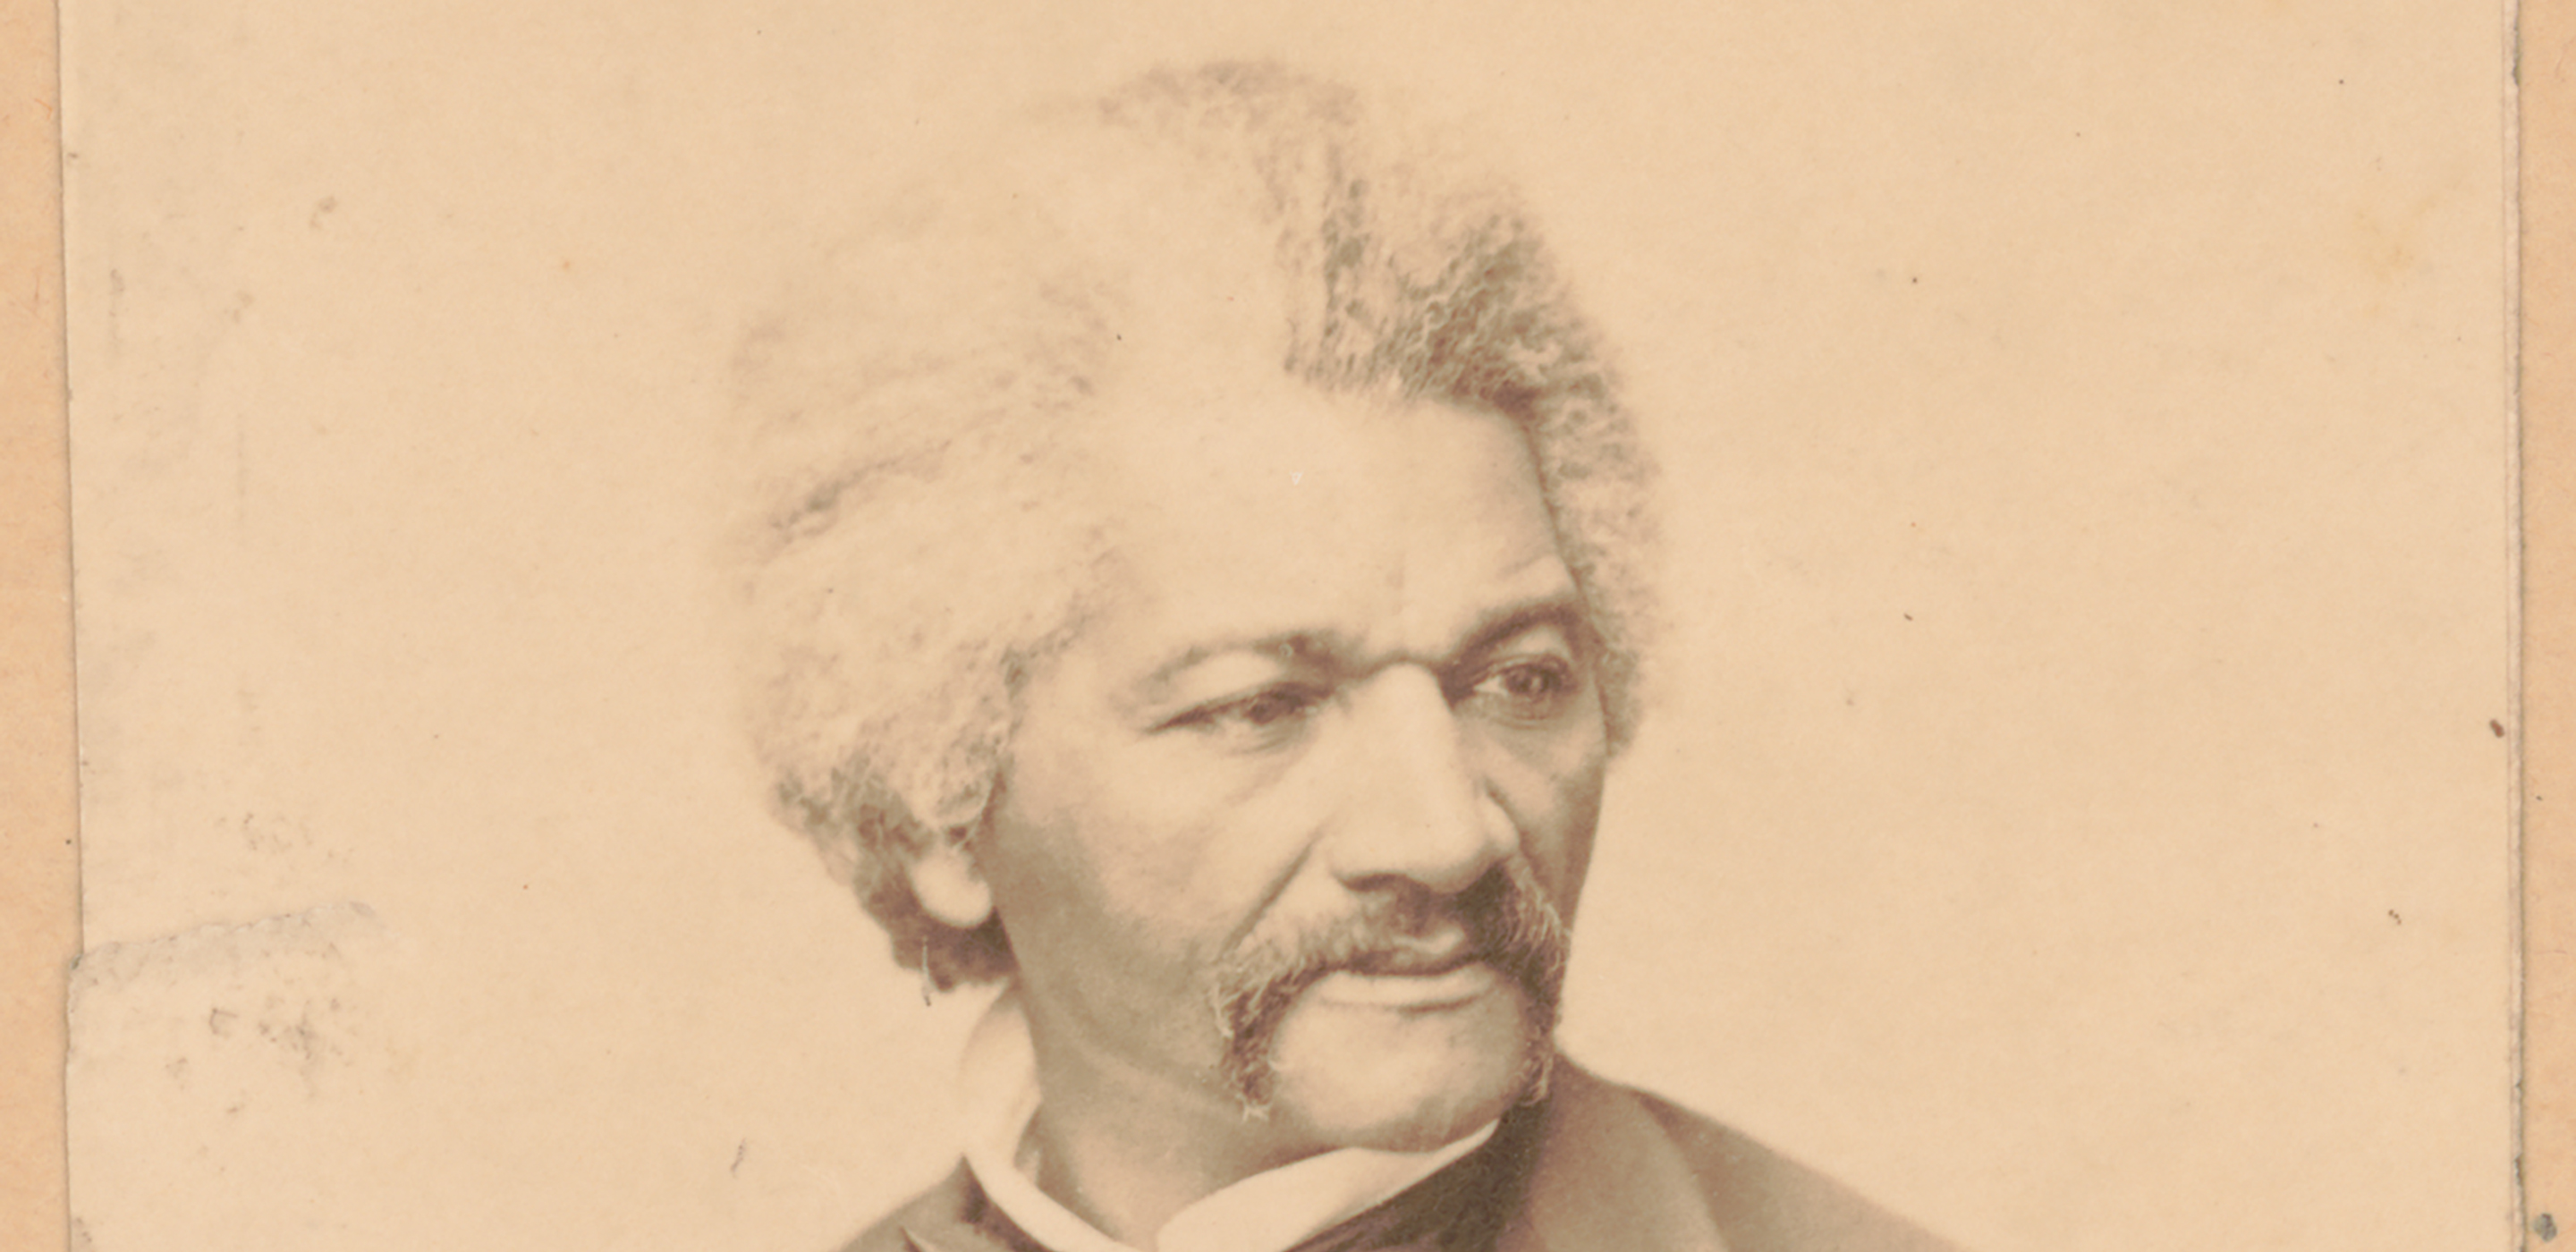 A black and white, 1870 head and shoulders portrait of an African American man with grey hair and a long mustache wearing a black 3-piece suit, white shirt and black bow tie. His gaze is to the right, away from the camera.